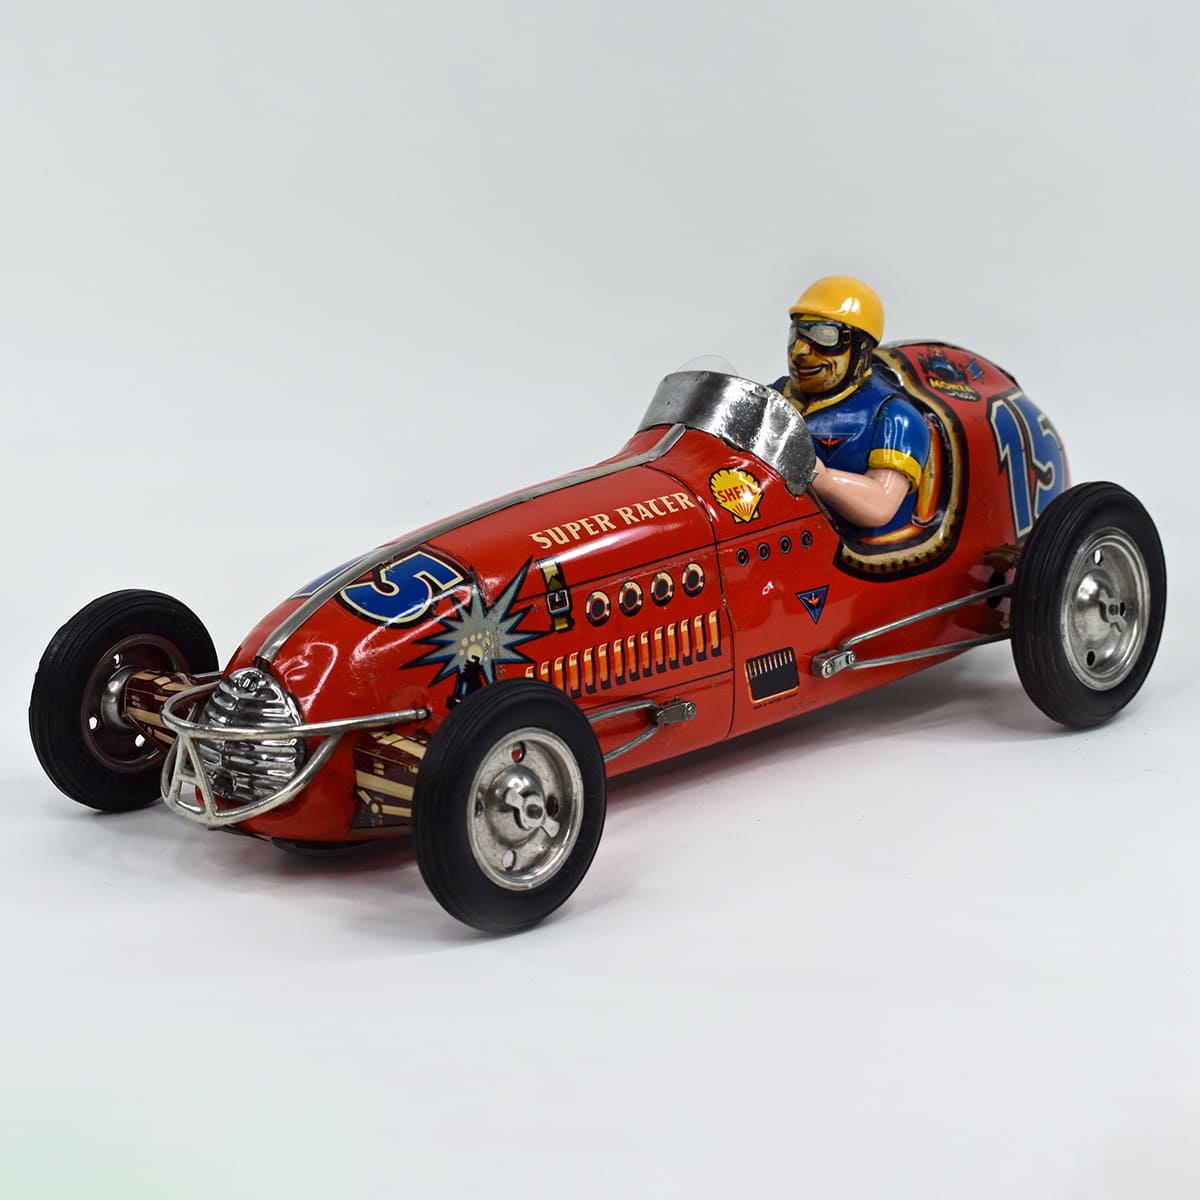 Monza Star #15 Super Racer Wuco Germany 20" Friction Drive DD